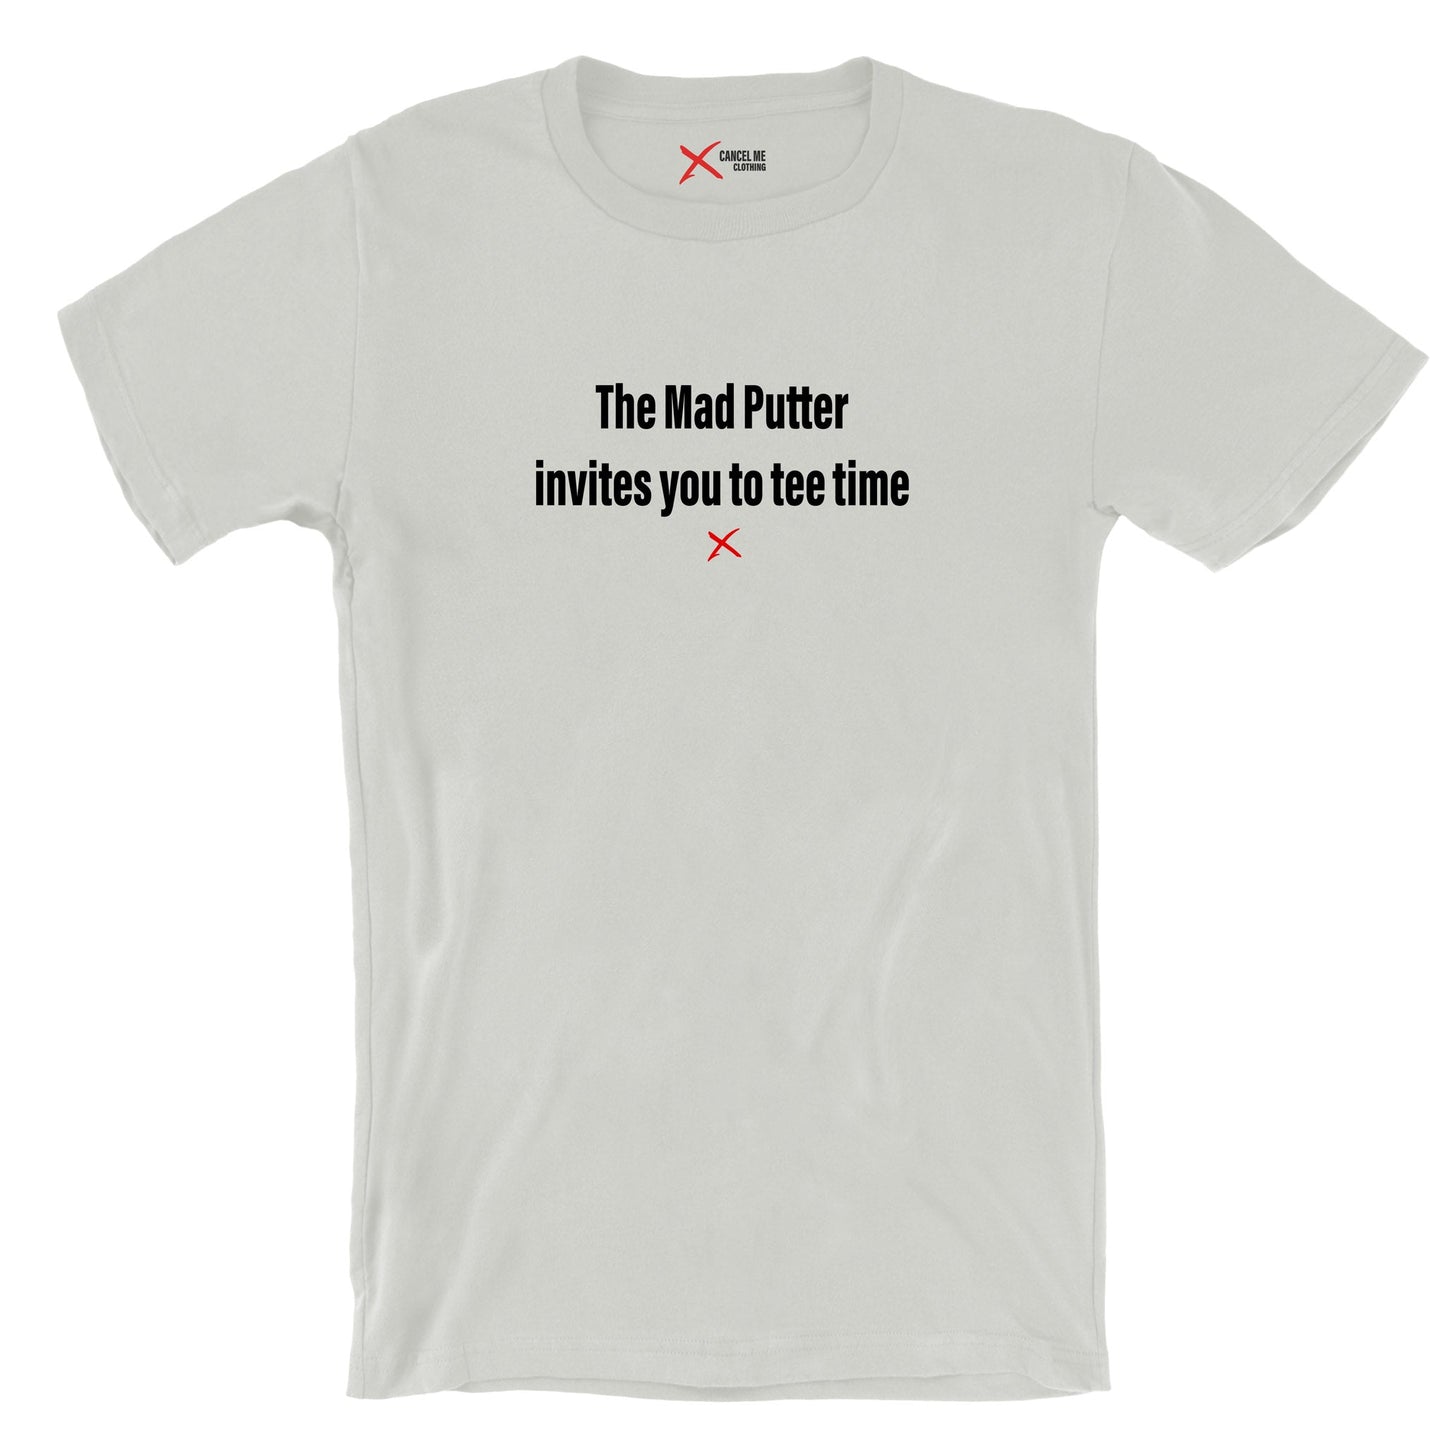 The Mad Putter invites you to tee time - Shirt